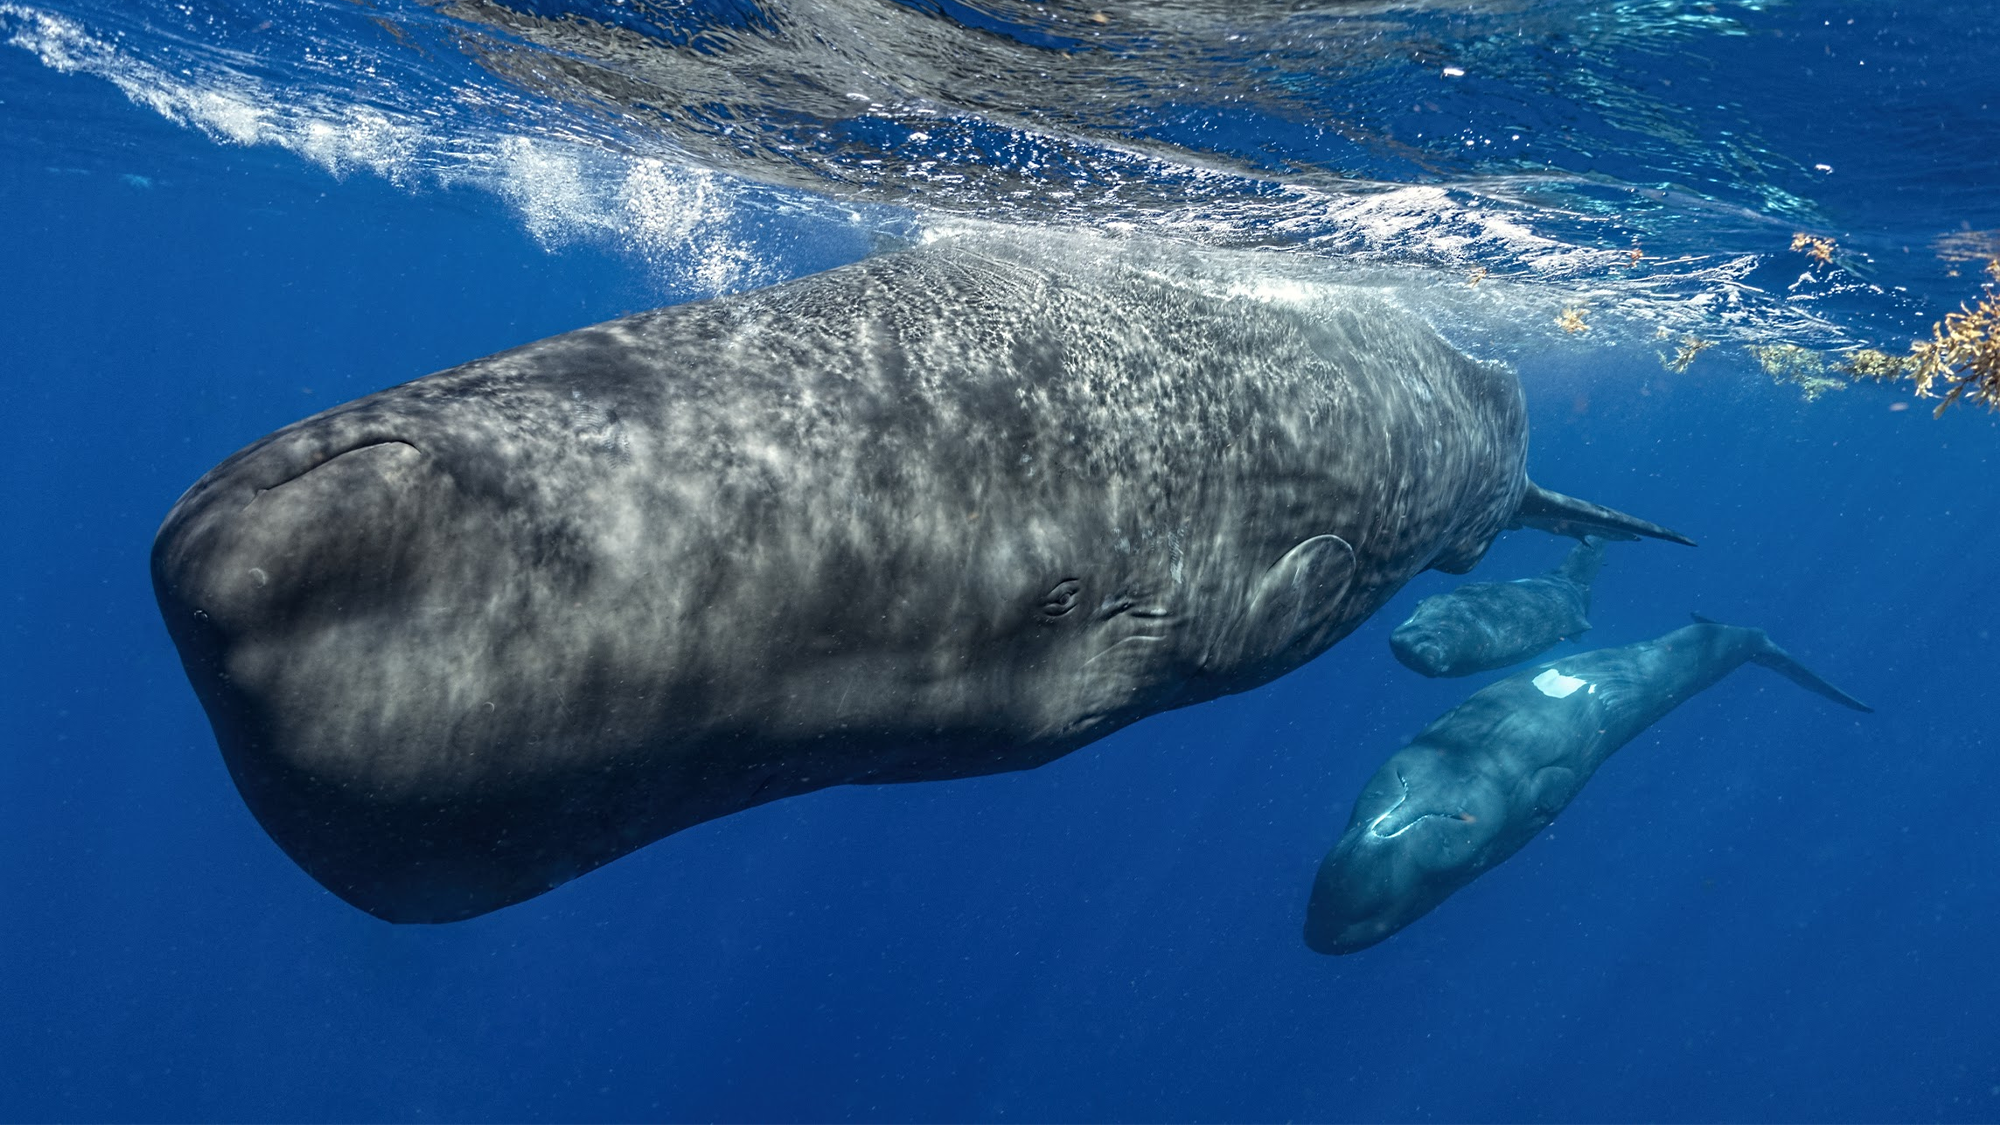 three sperm whales swimming near the surface of the ocean